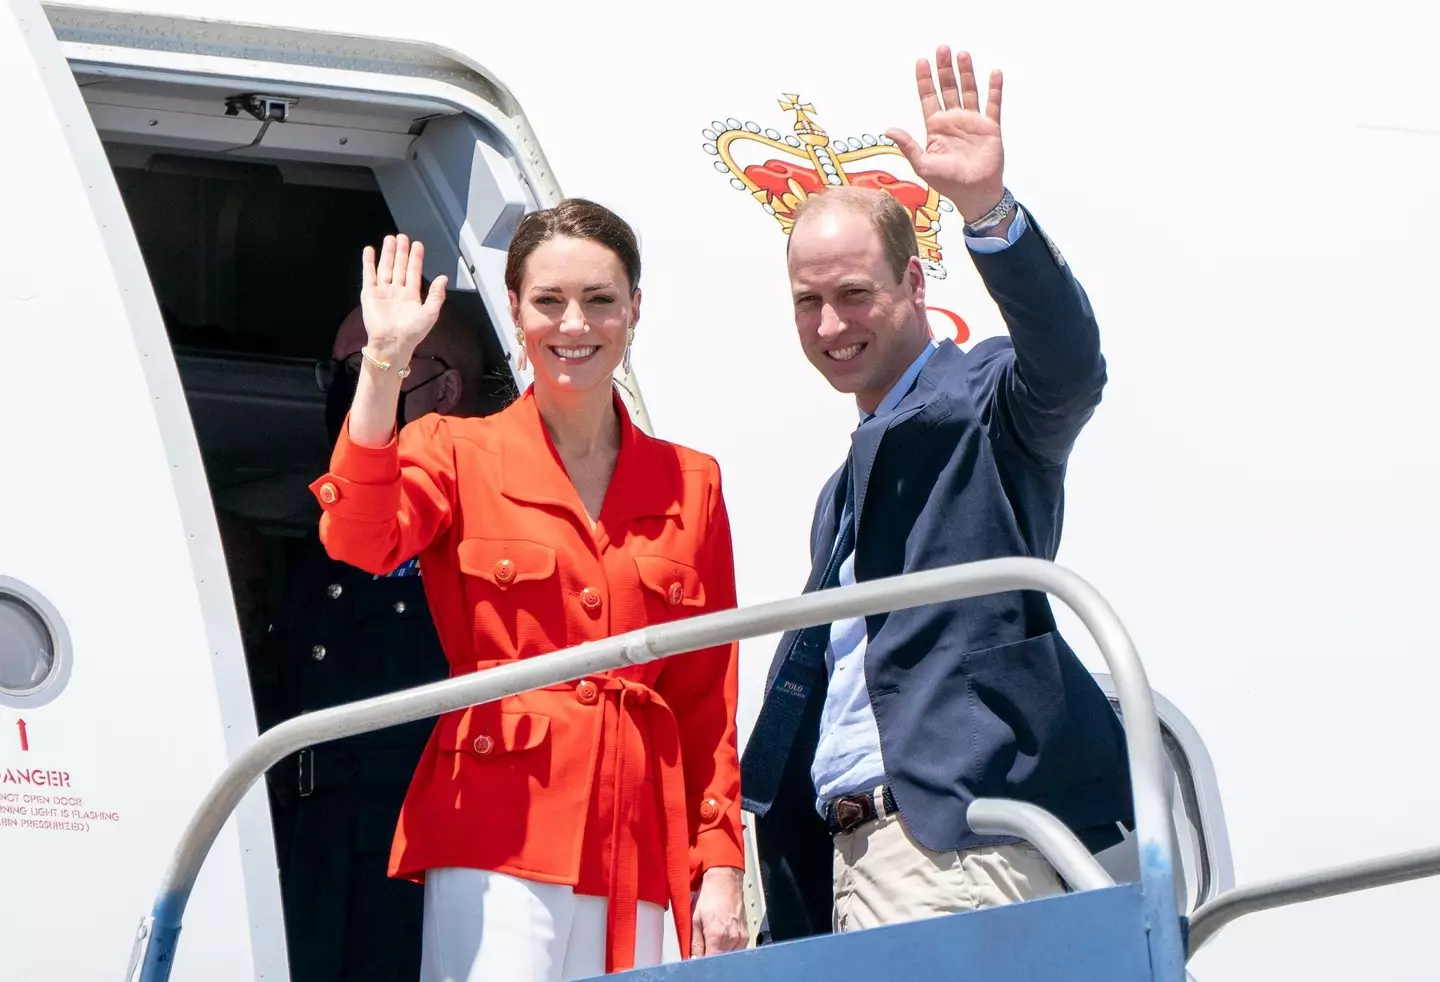 The Duke and Duchess of Cambridge leaving Belize on their week-long tour in celebration of Queen Elizabeth's Diamond Jubilee.